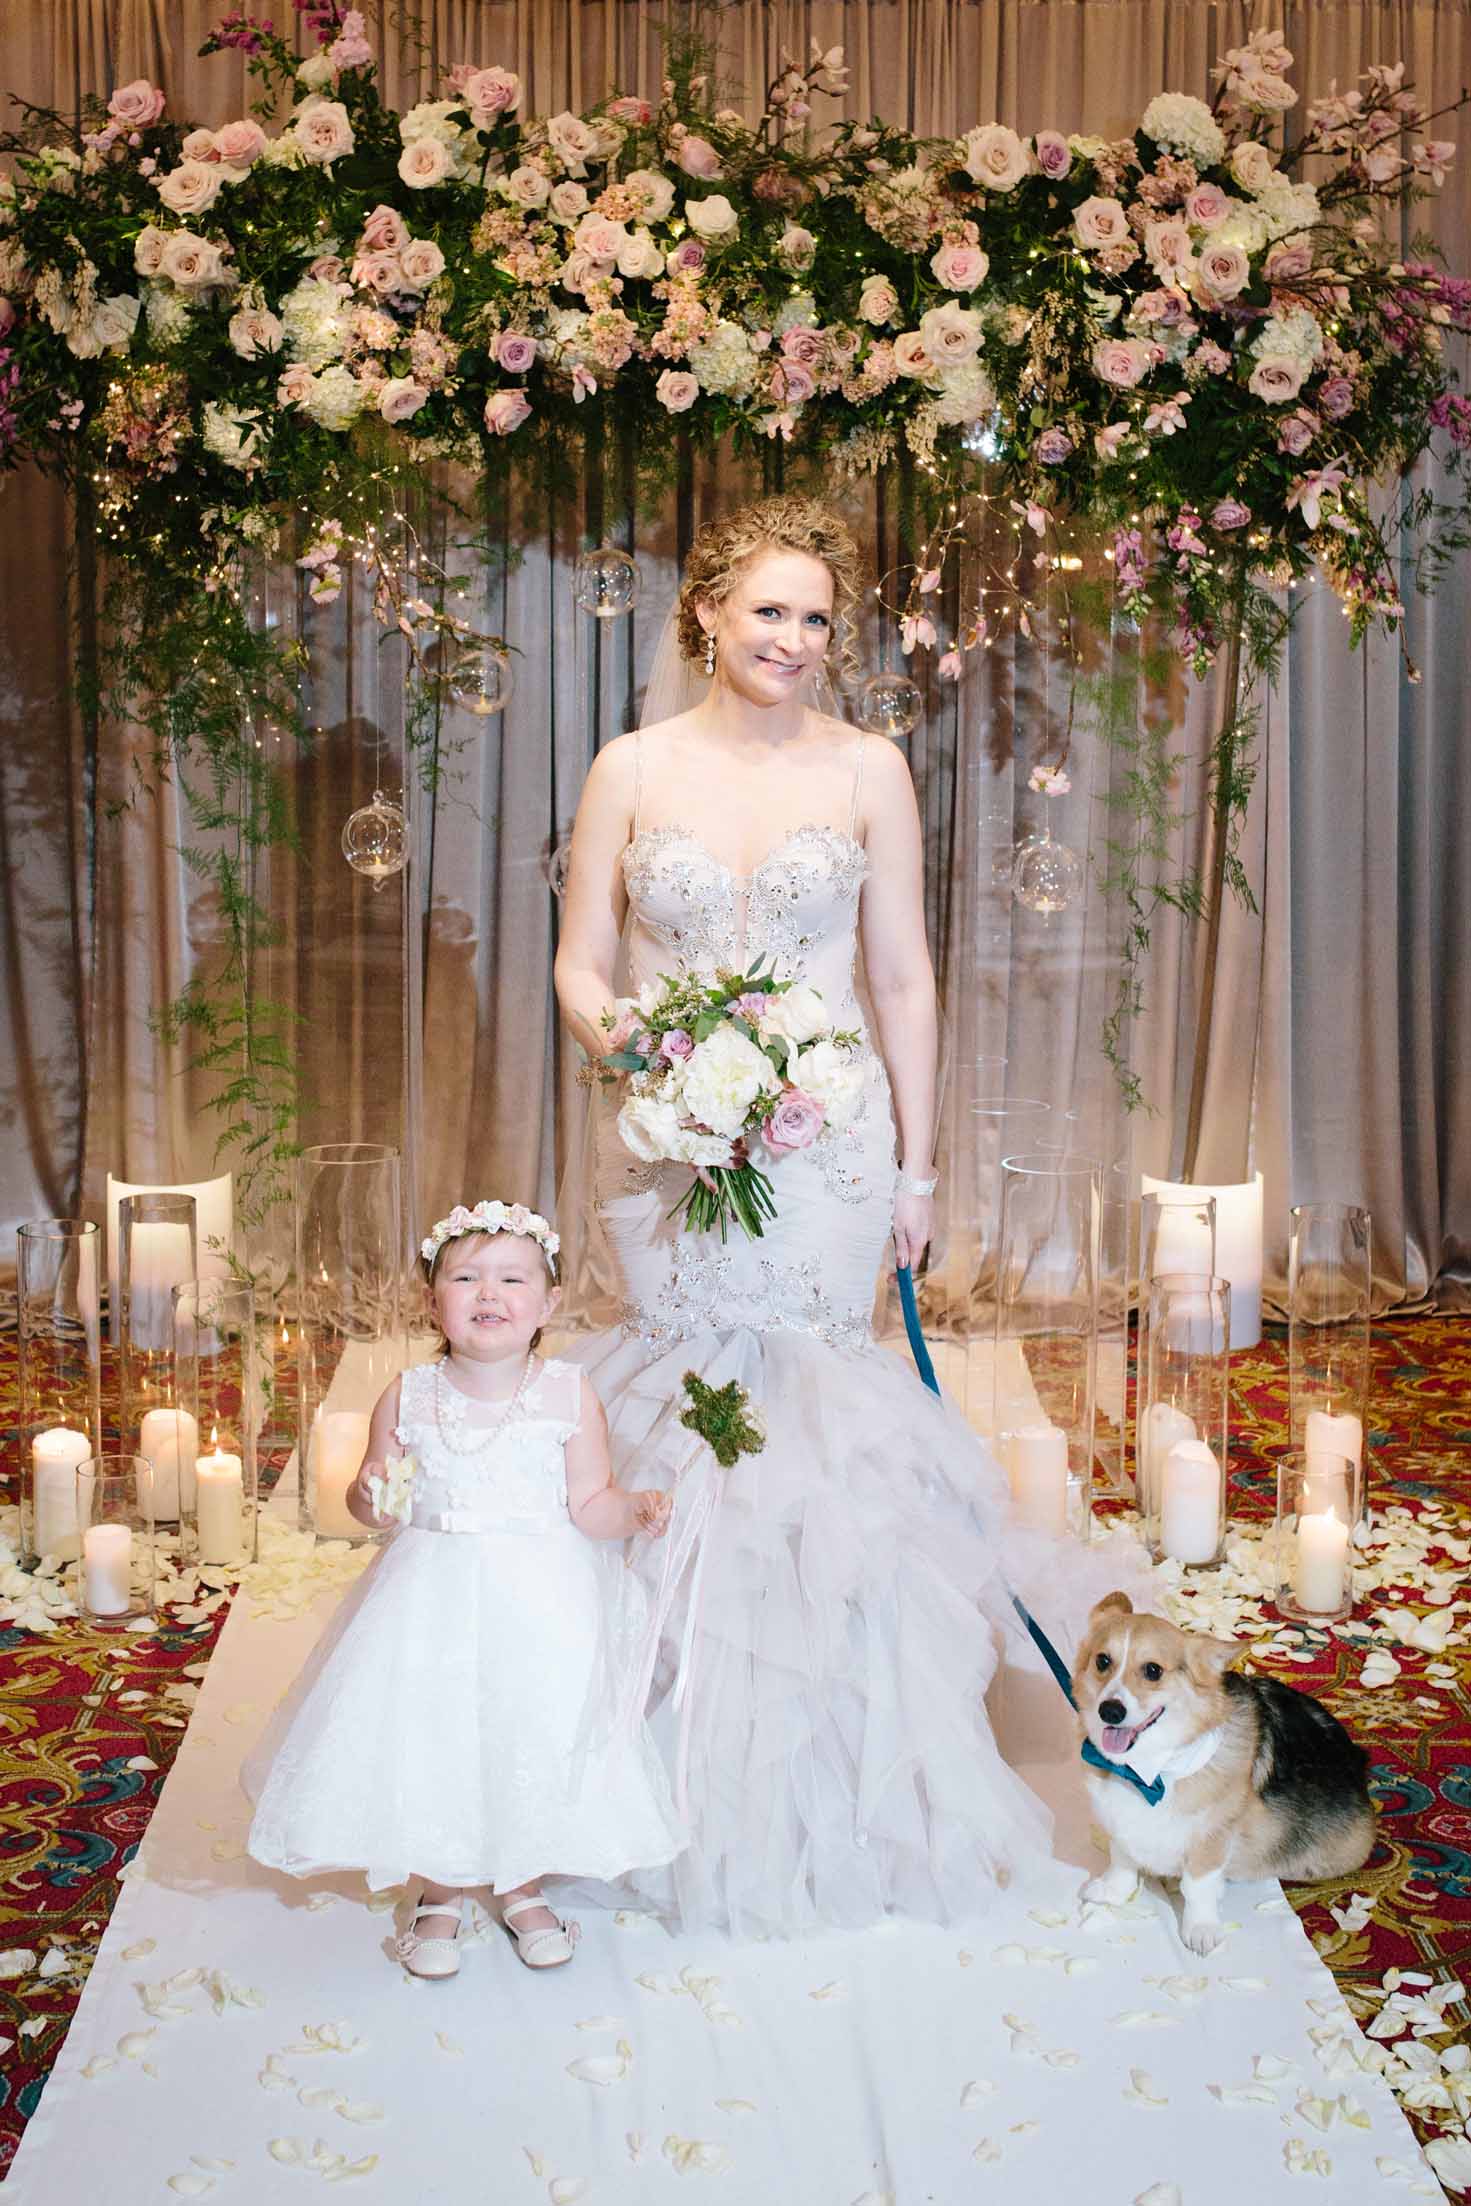 Bride standing with flower girl and dog in front of lush floral spring garden ceremony arch surrounded by candles